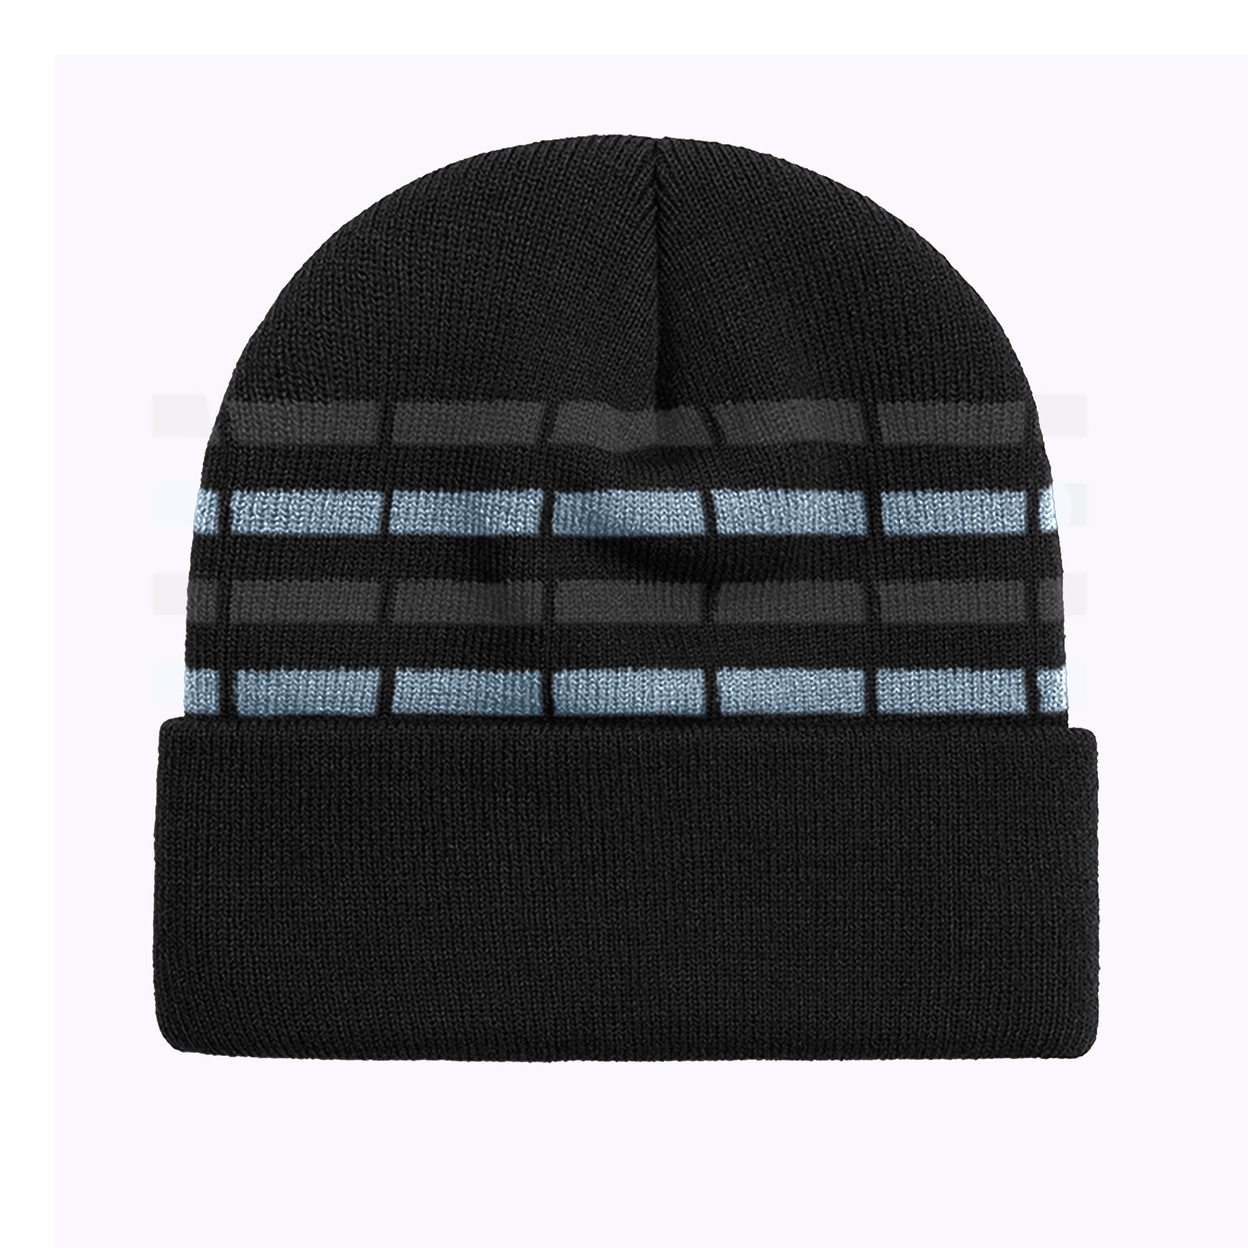 2-Pack Men's Winter Warm Cozy Knit Cuffed Solid & Striped Beanie Hat With Faux Fur Lining - Black Striped / Grey Solid